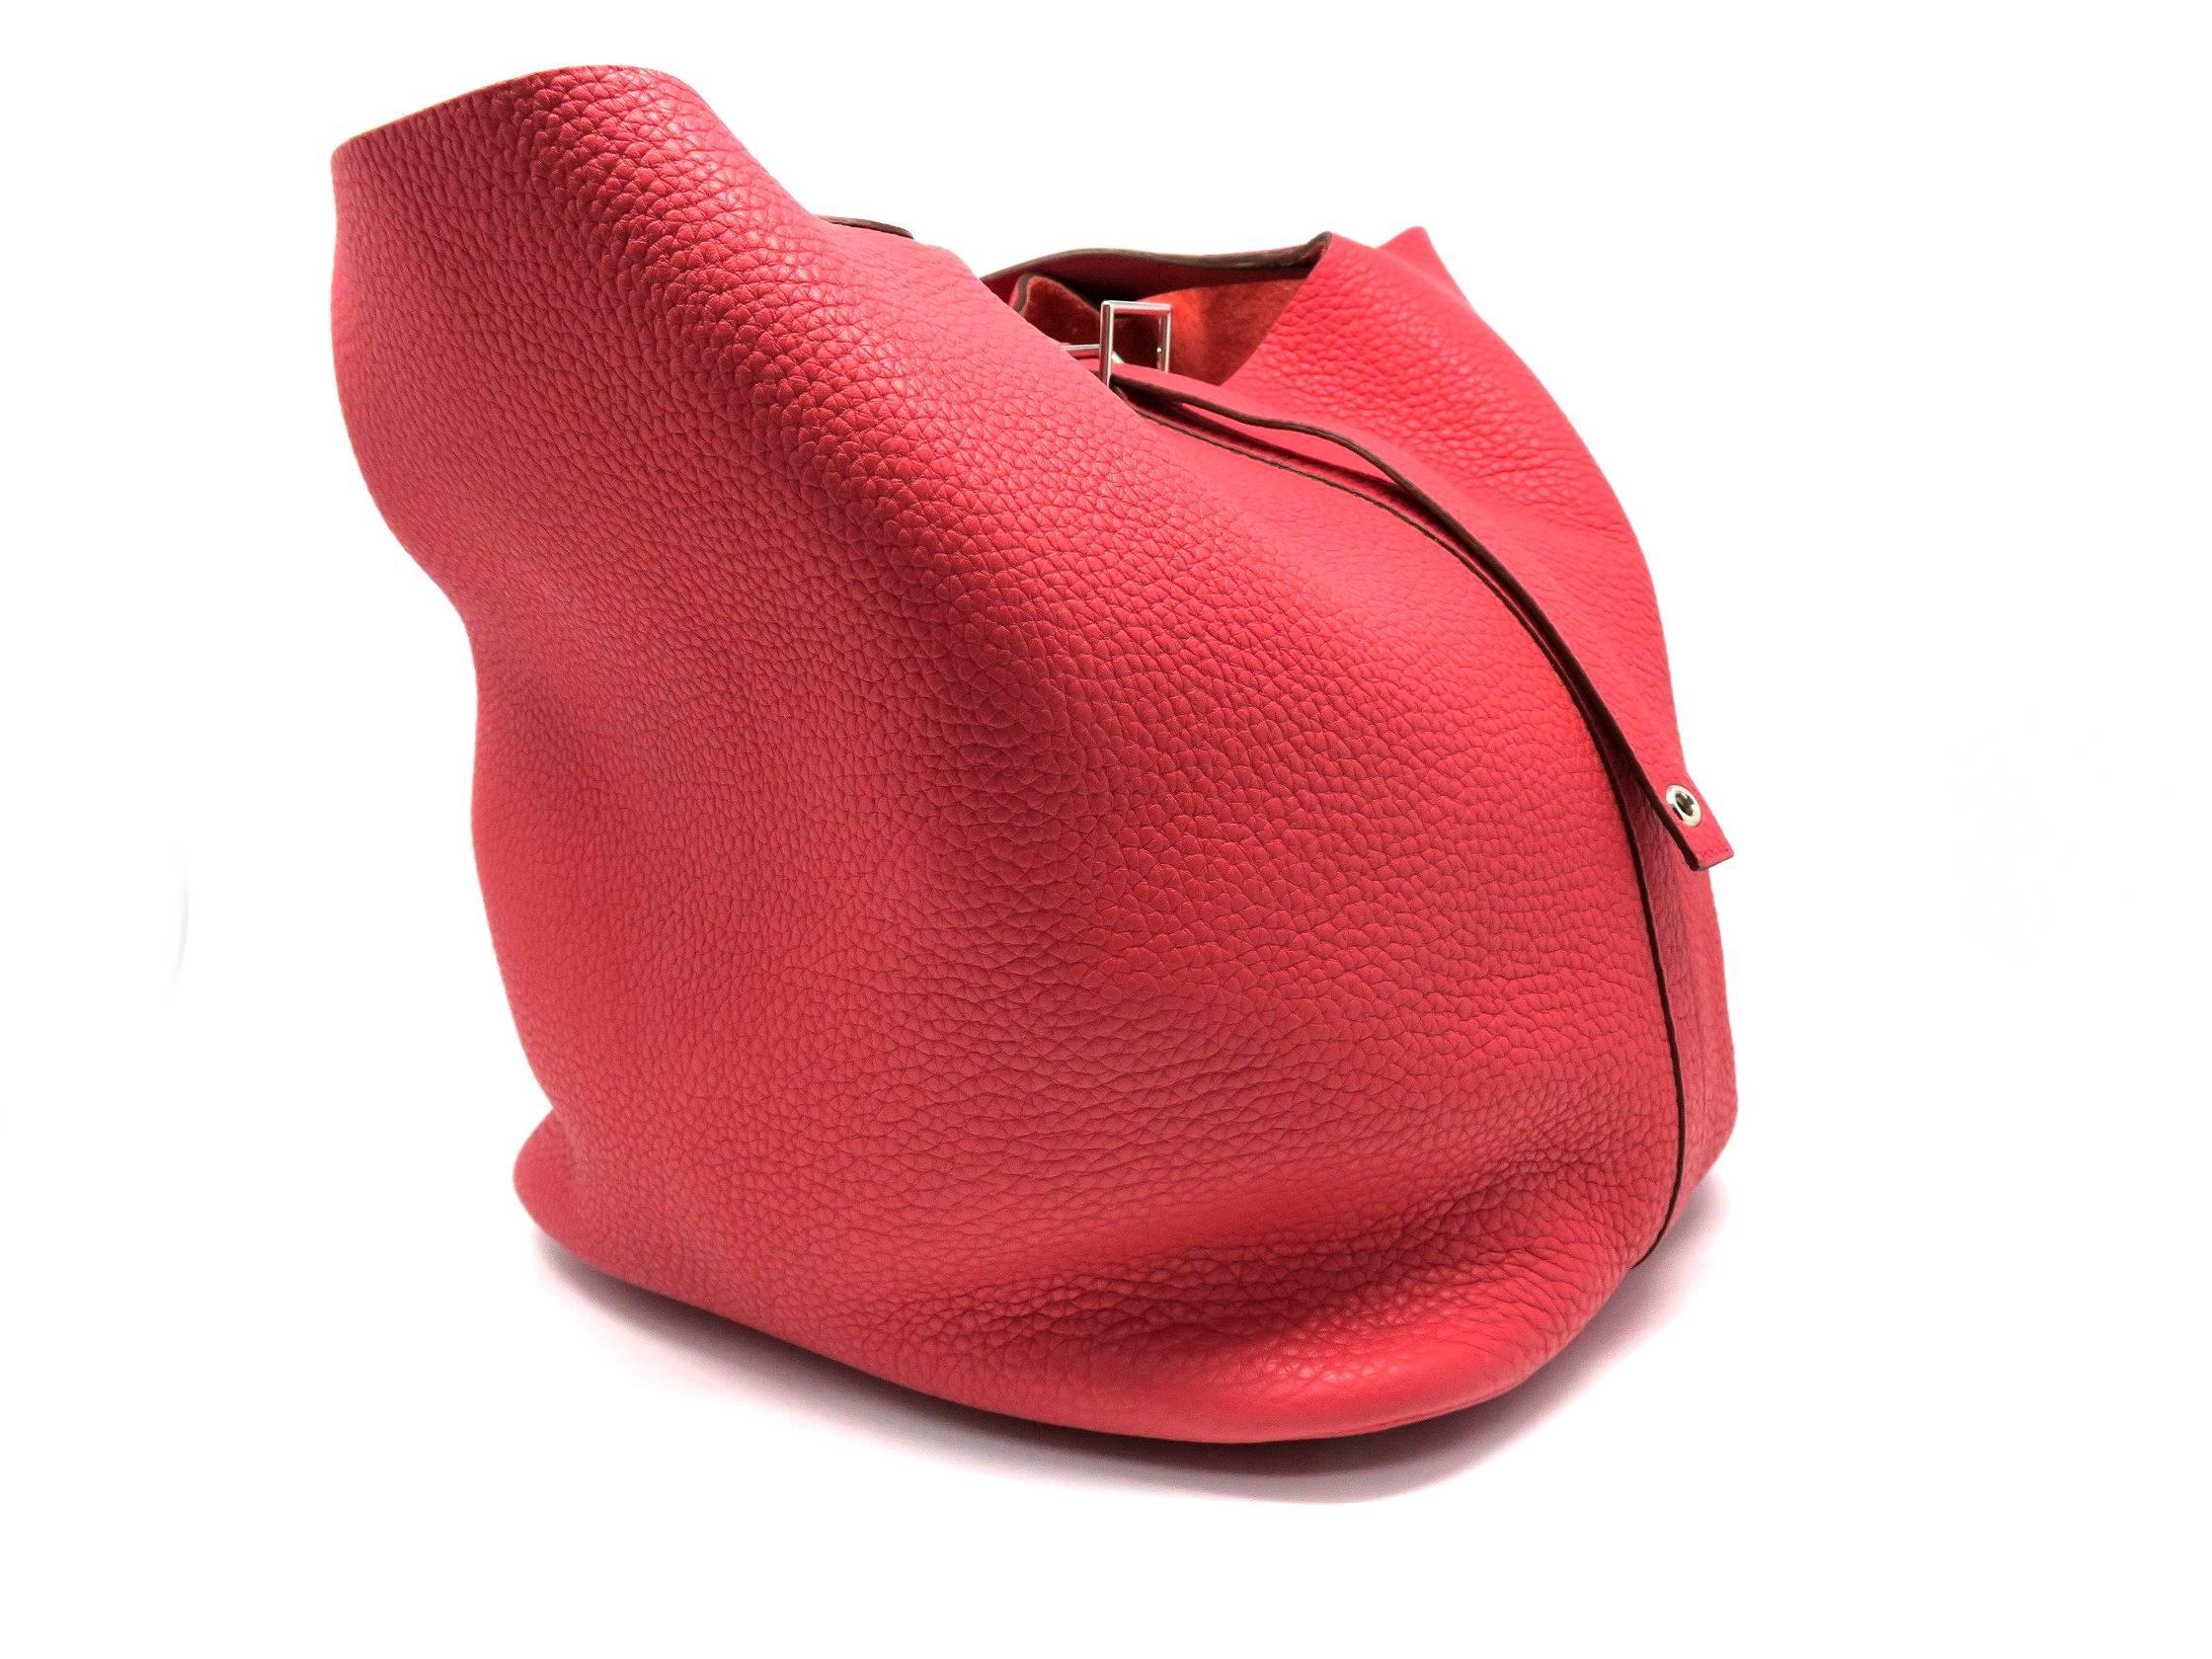 Color: Red / Bougainvillier (designer color)
Material: Taurillon Clemence Leather

Condition:
Rank A
Overall: Good, few minor defects
Surface:Good
Corners:Good
Edges:Good
Handles/Straps:Good
Hardware:Minor Scratches 

Dimensions:
W21 × H26 ×